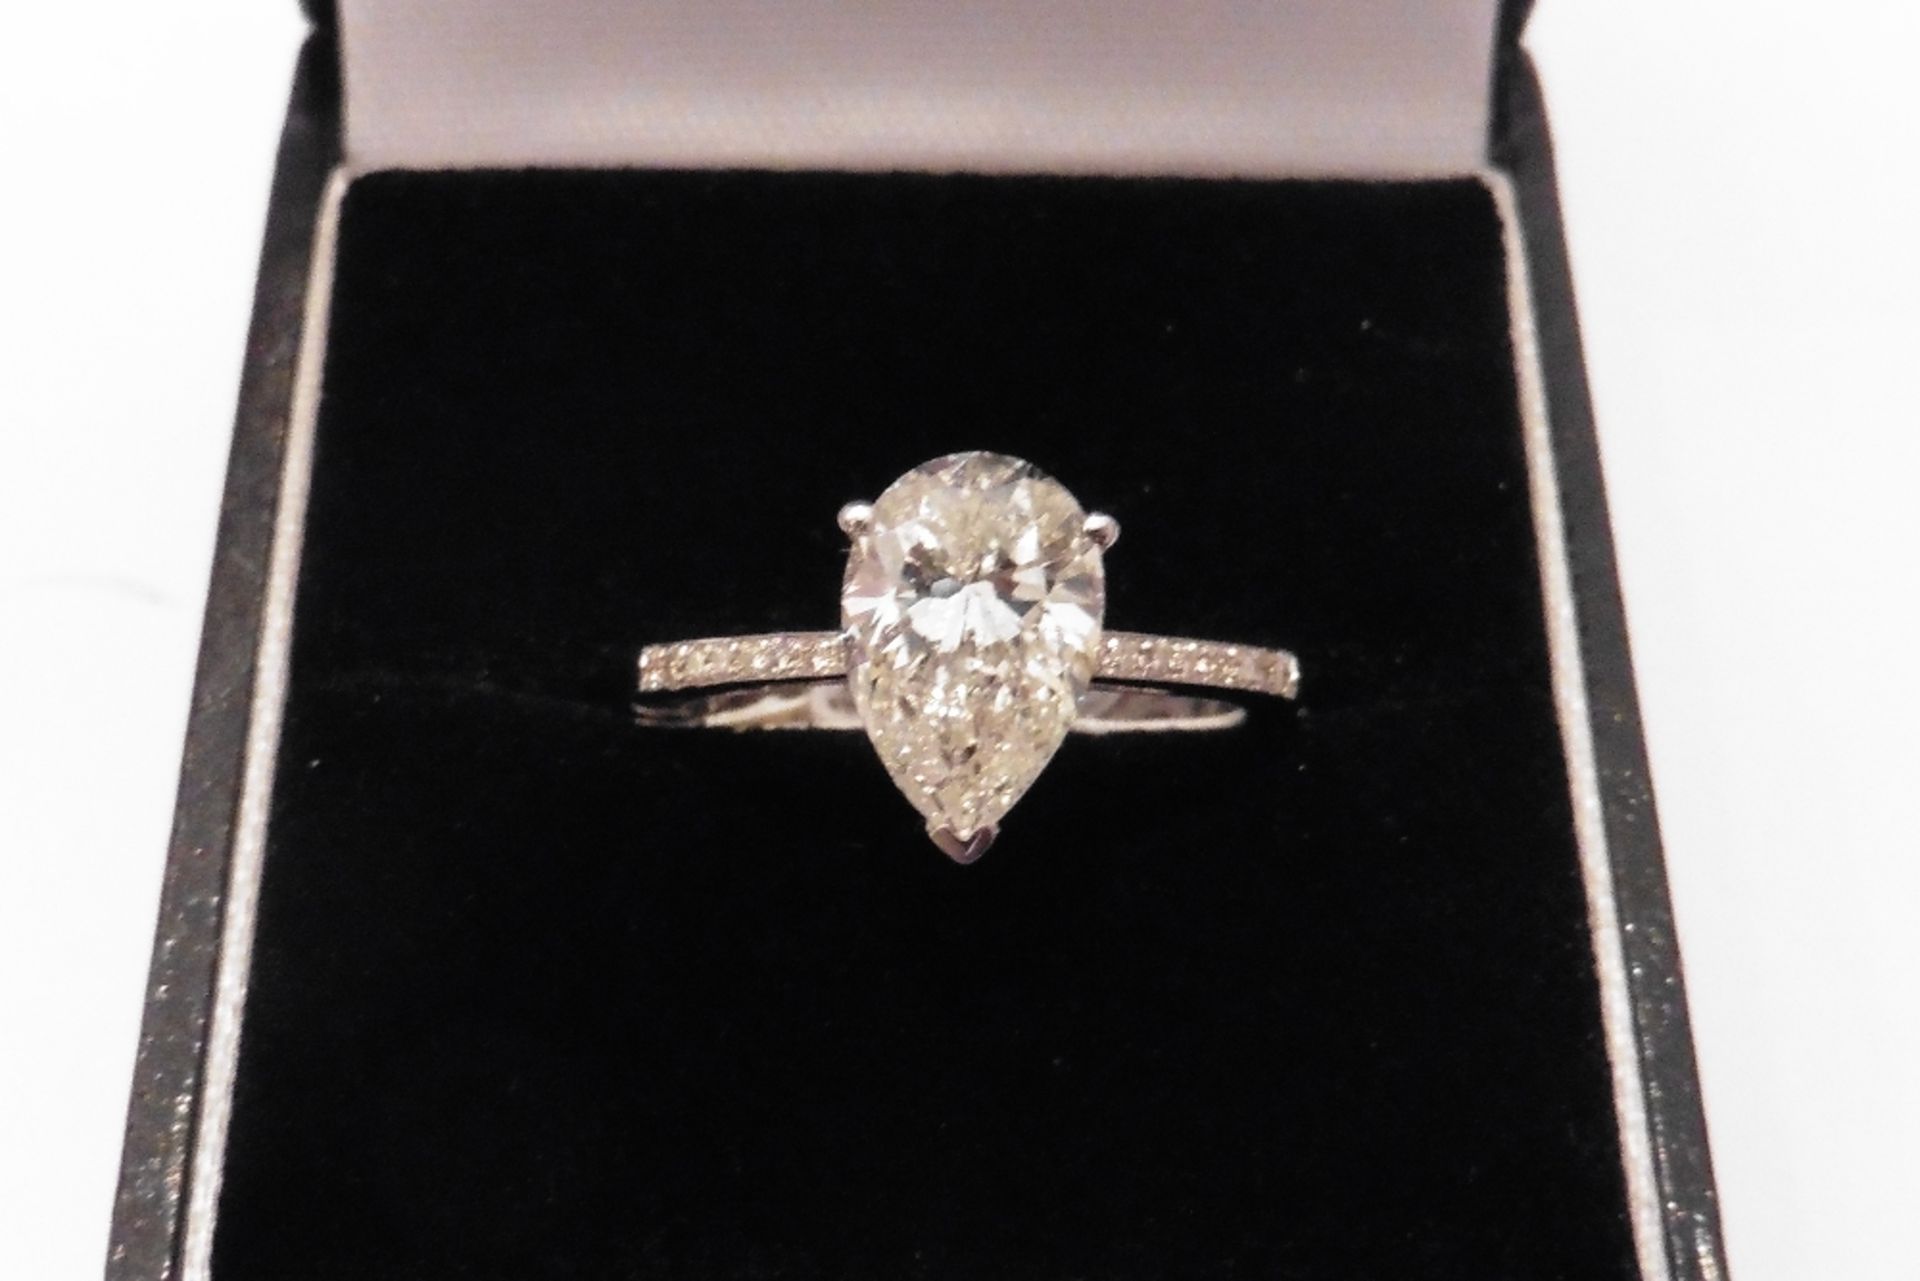 Tiffany set diamond solitaire ring hosting a beautiful pear shaped diamond weighing 2.06ct.  I colou